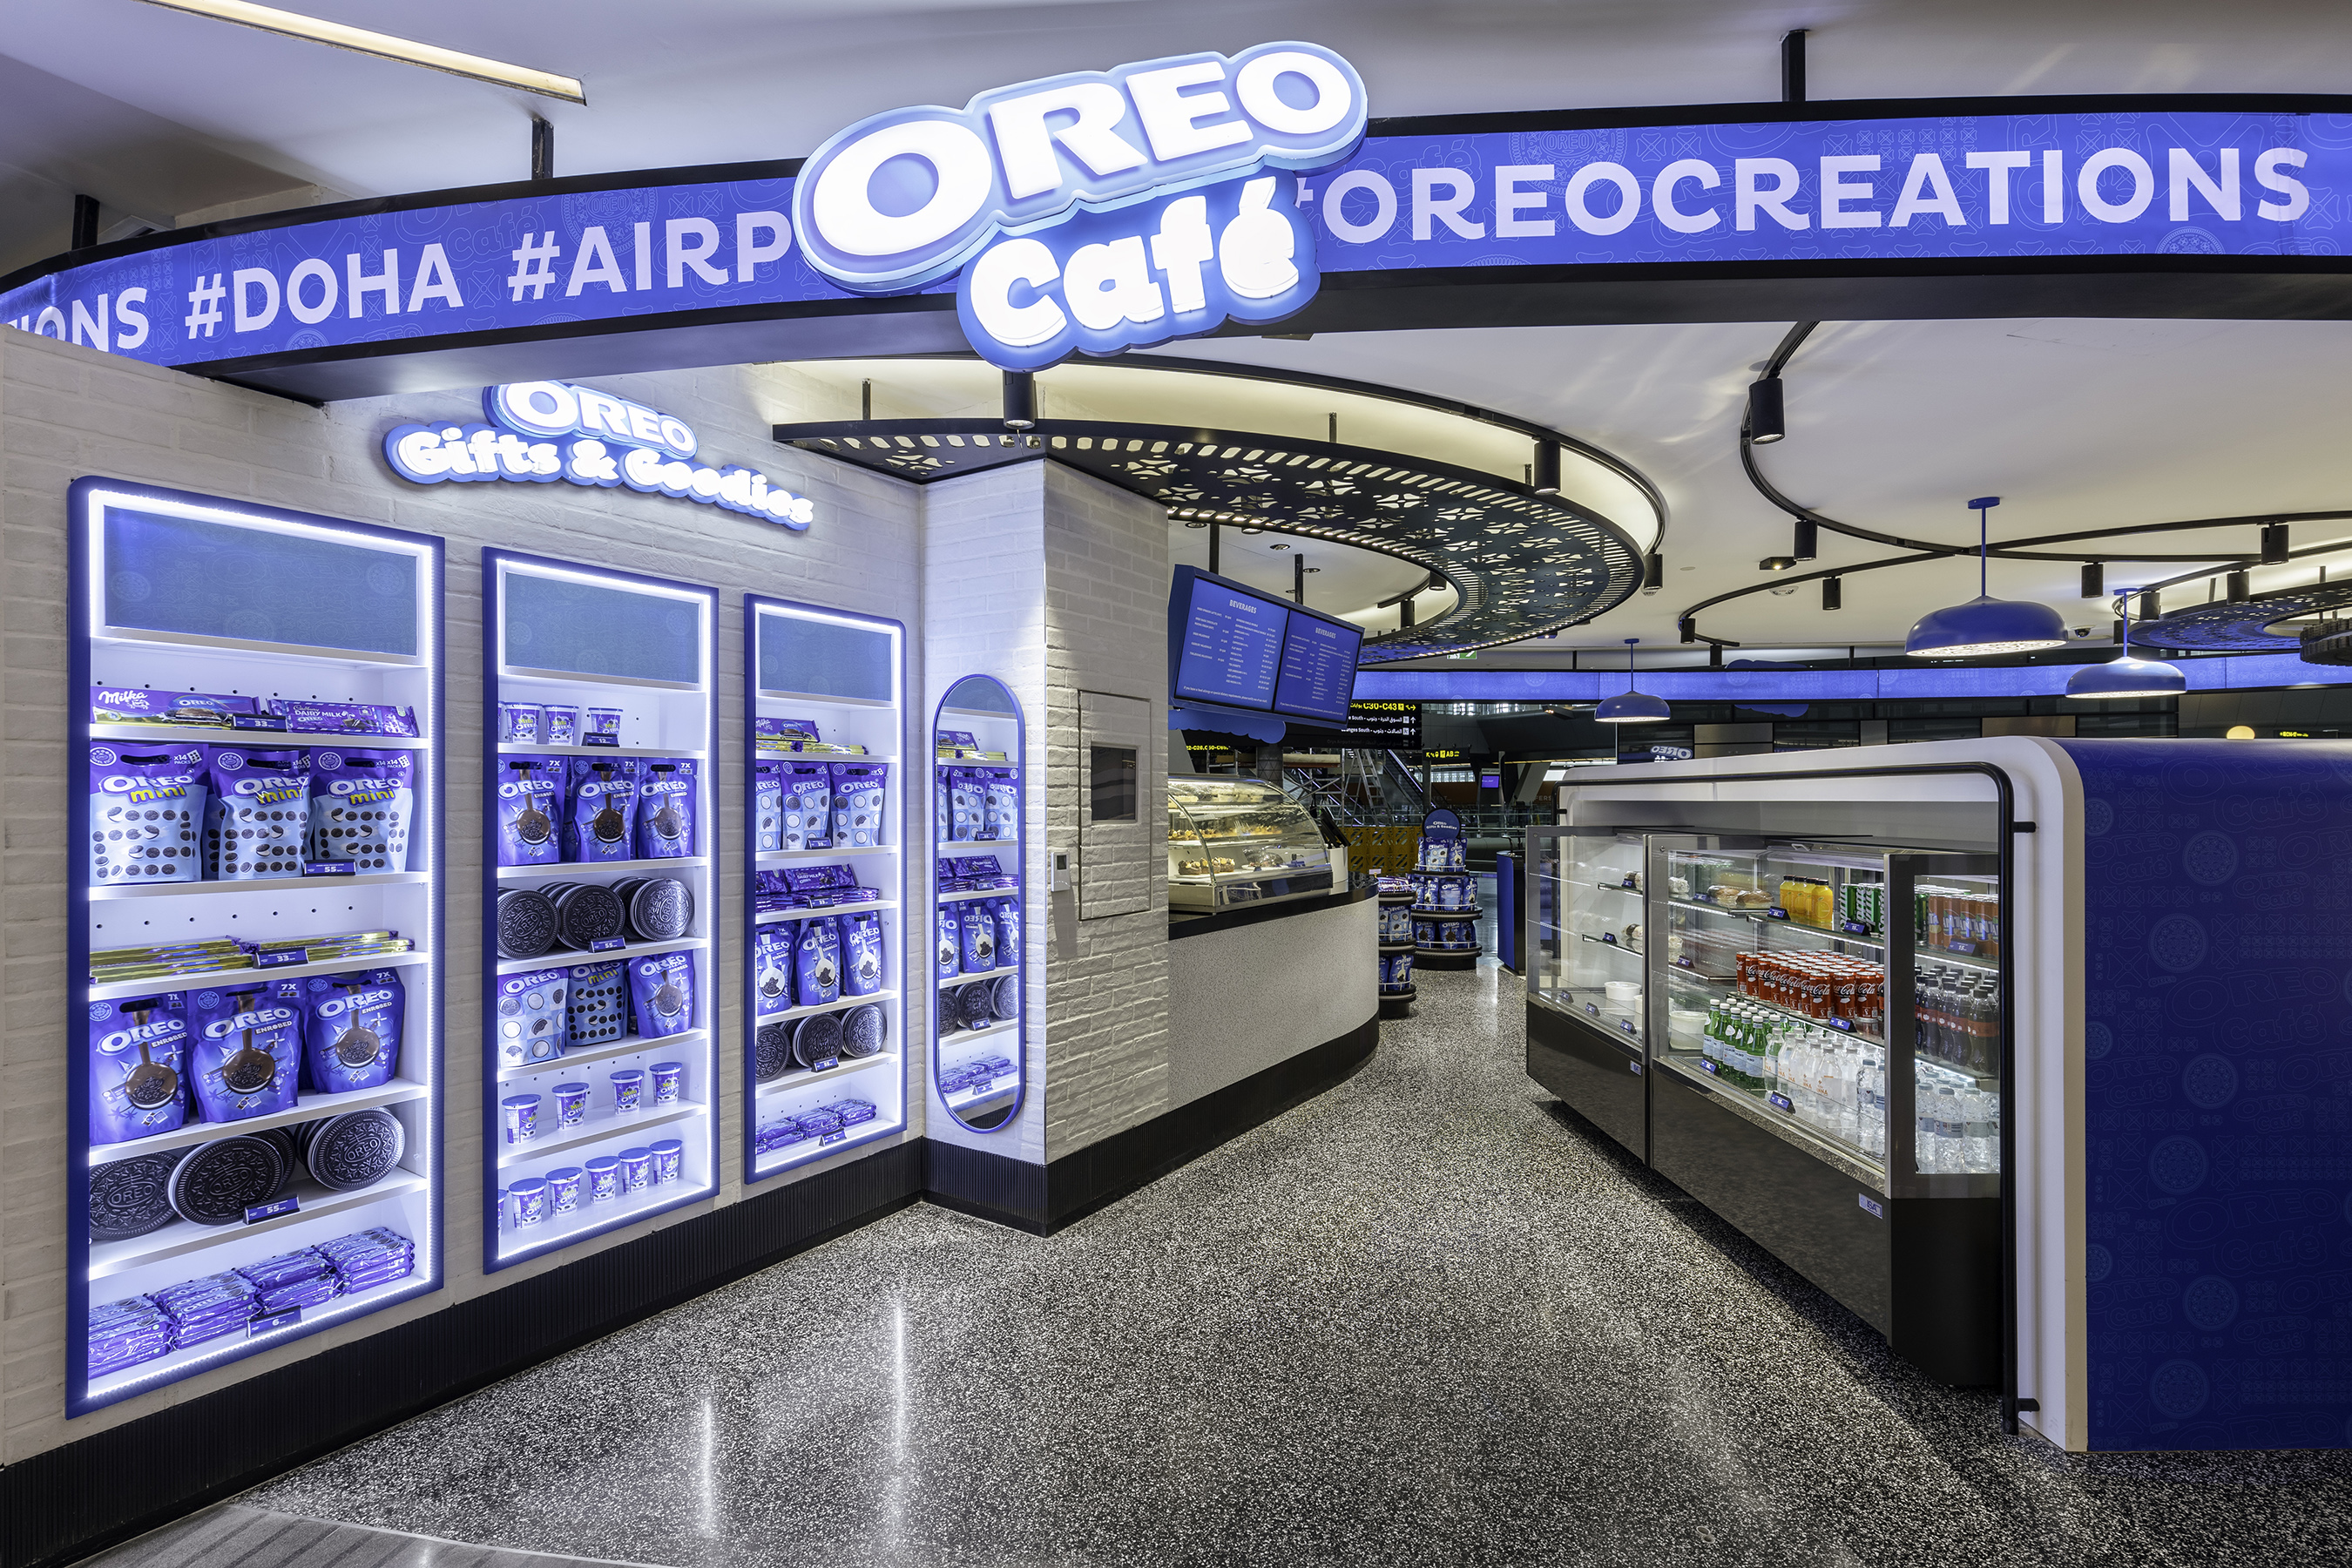 This is the first OREO Café outside of the US and the first in an airport.